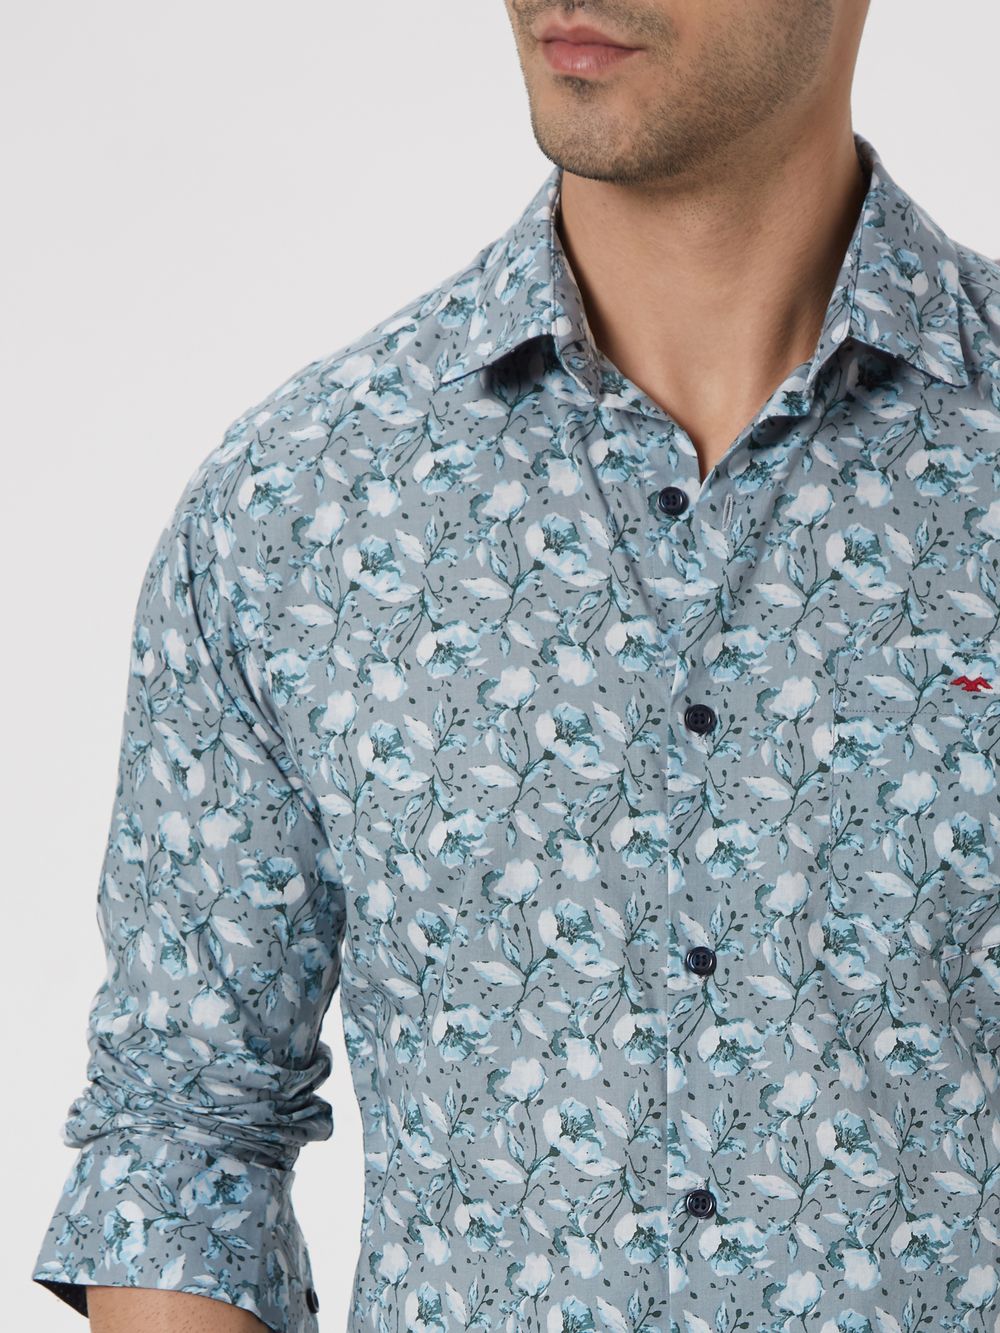 Grey & White Floral Print Slim Fit Casual Shirt